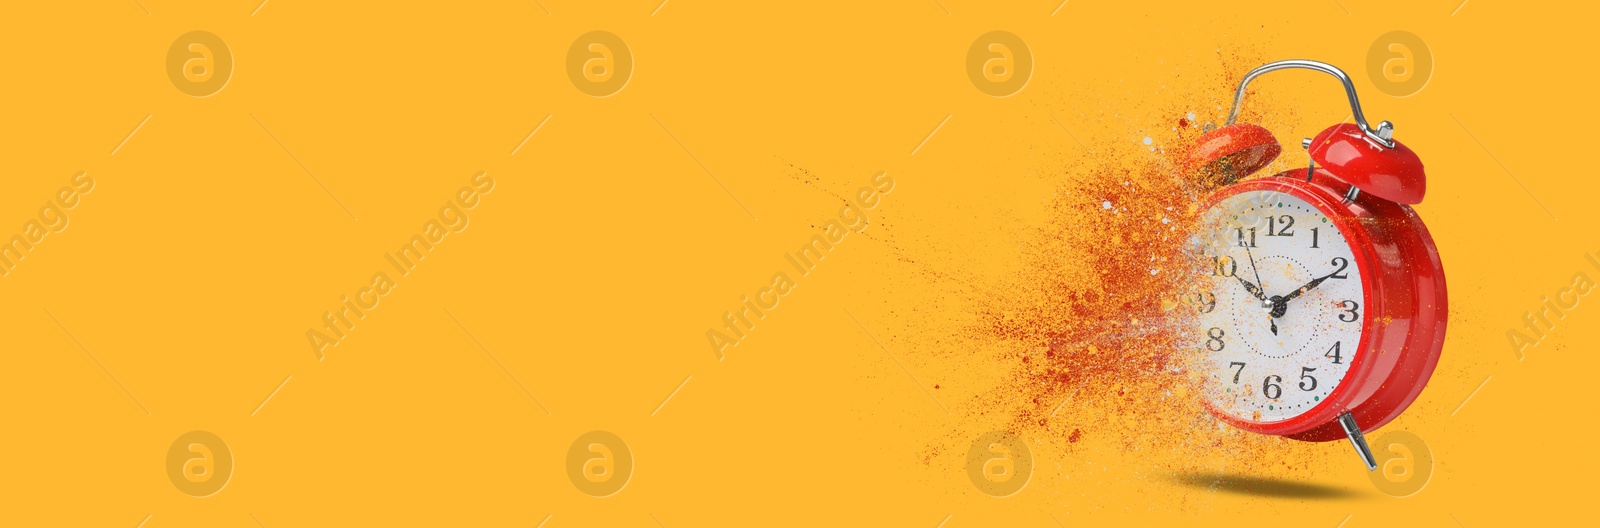 Image of Red alarm clock dissolving on orange background, banner design with space for text. Flow of time